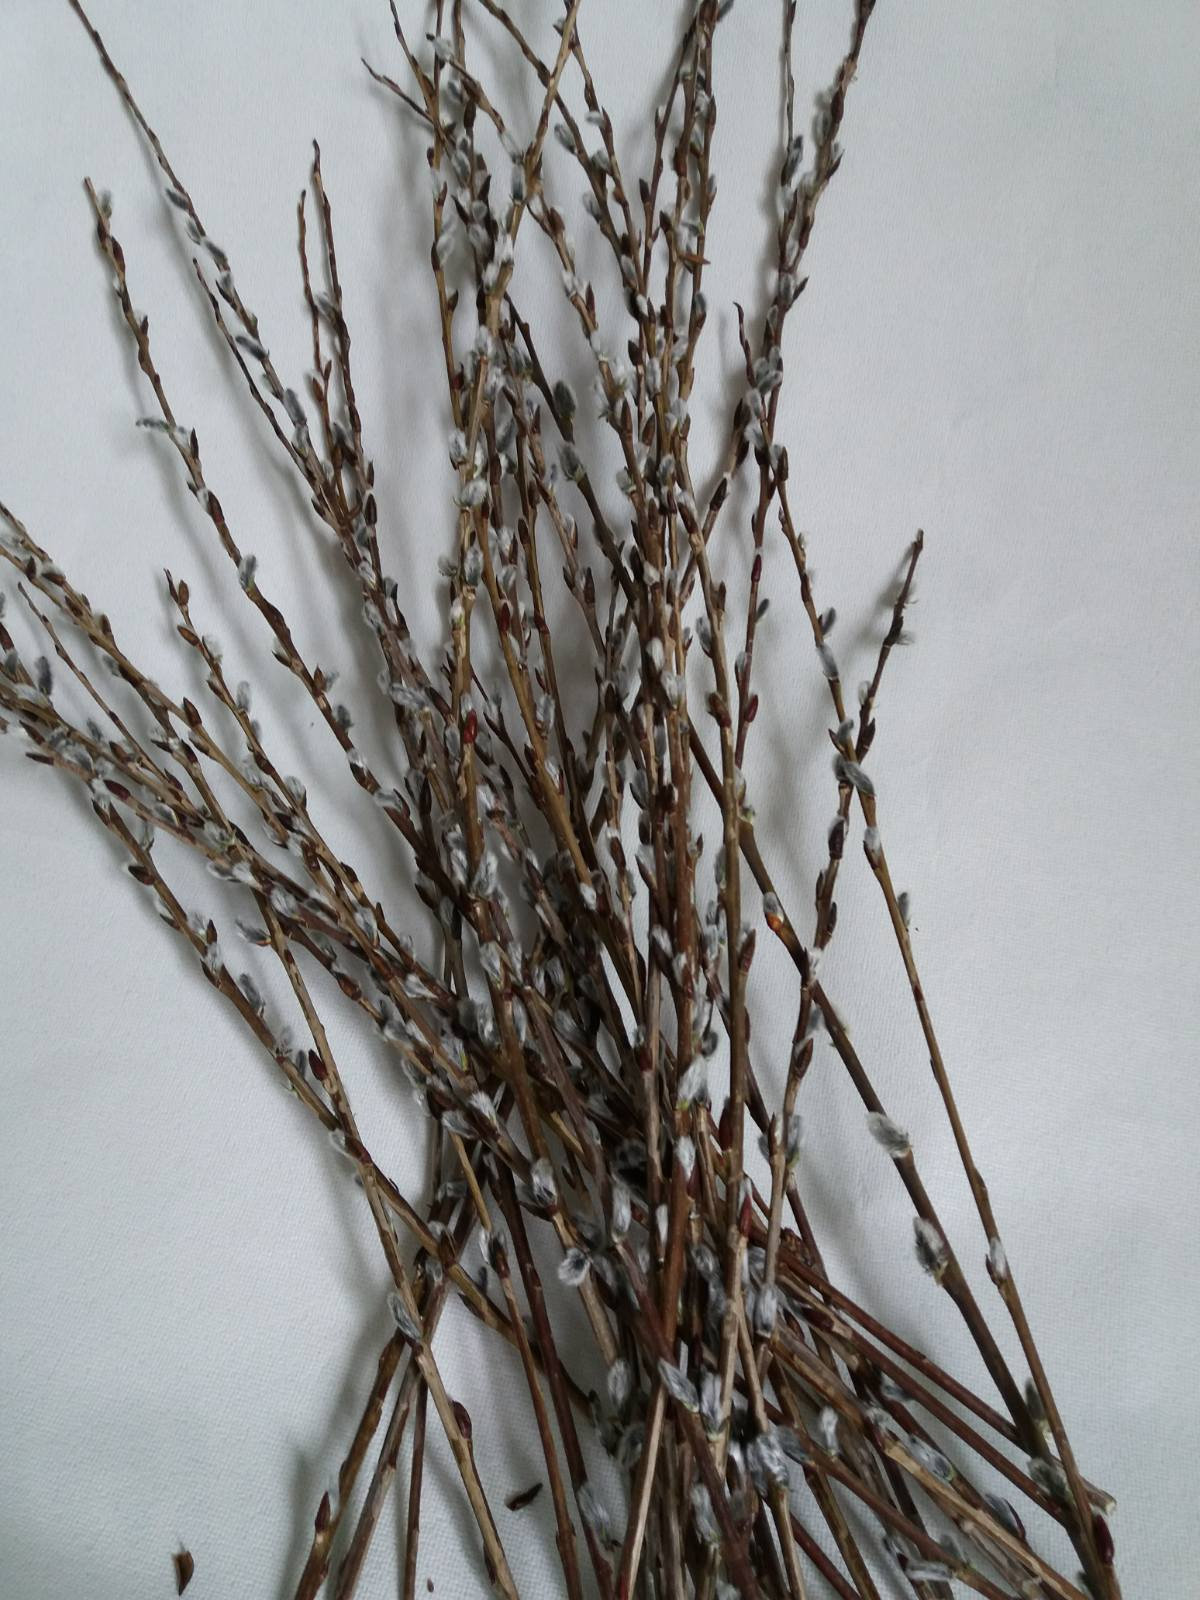 Willow branches Vase filler natural Catkins Natural dried branches Stems pussy willow Eco home decor Easter spring decor Eco present Gift